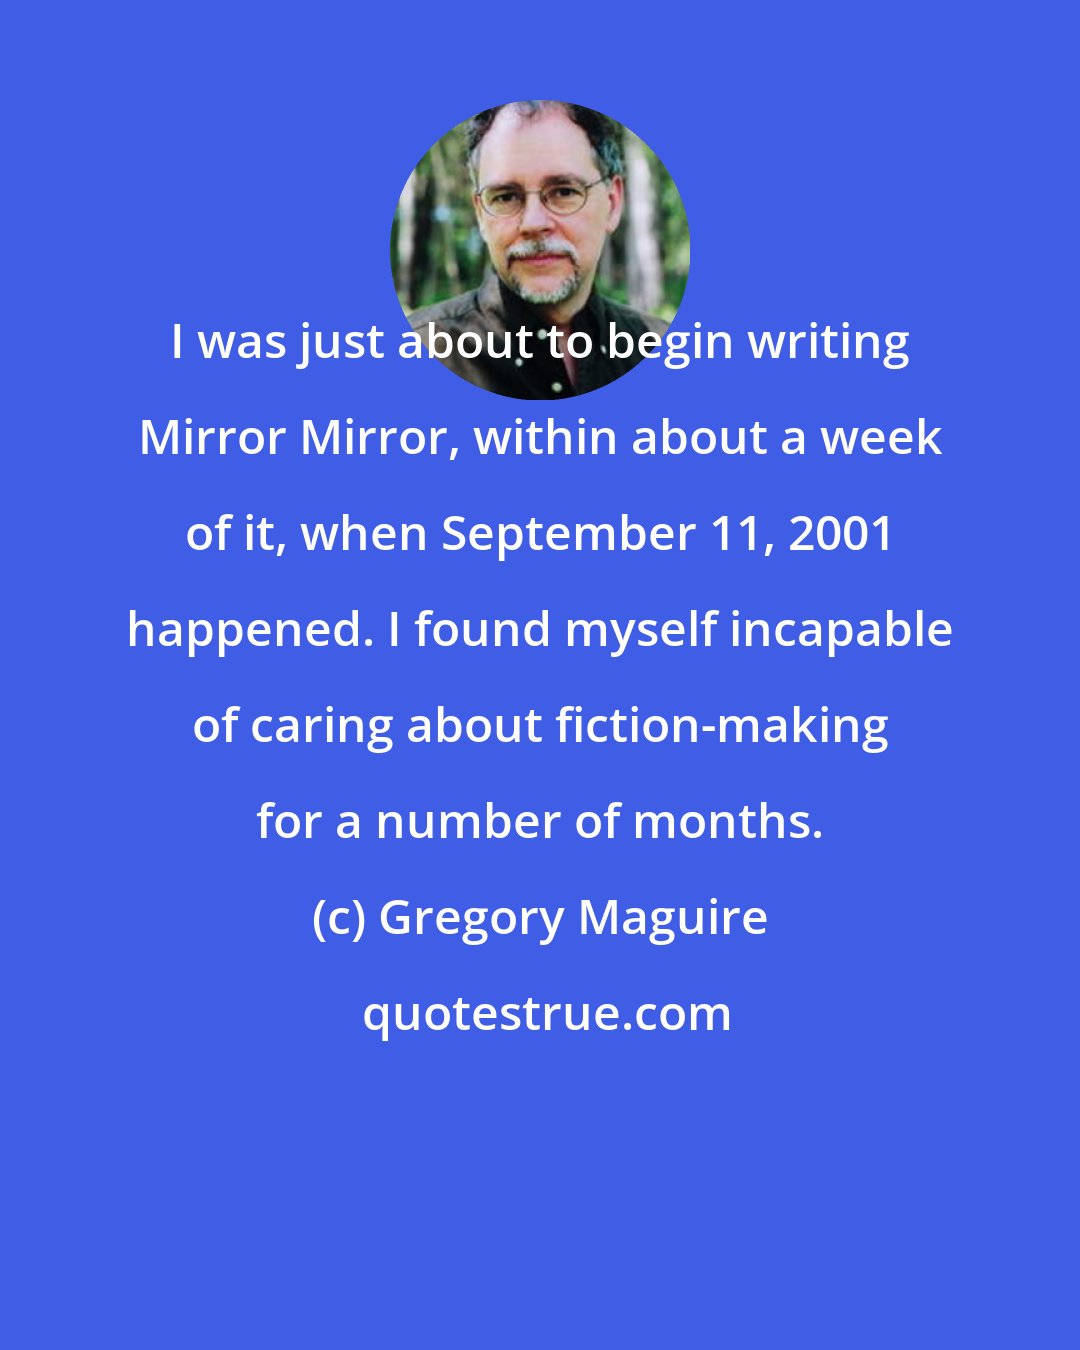 Gregory Maguire: I was just about to begin writing Mirror Mirror, within about a week of it, when September 11, 2001 happened. I found myself incapable of caring about fiction-making for a number of months.